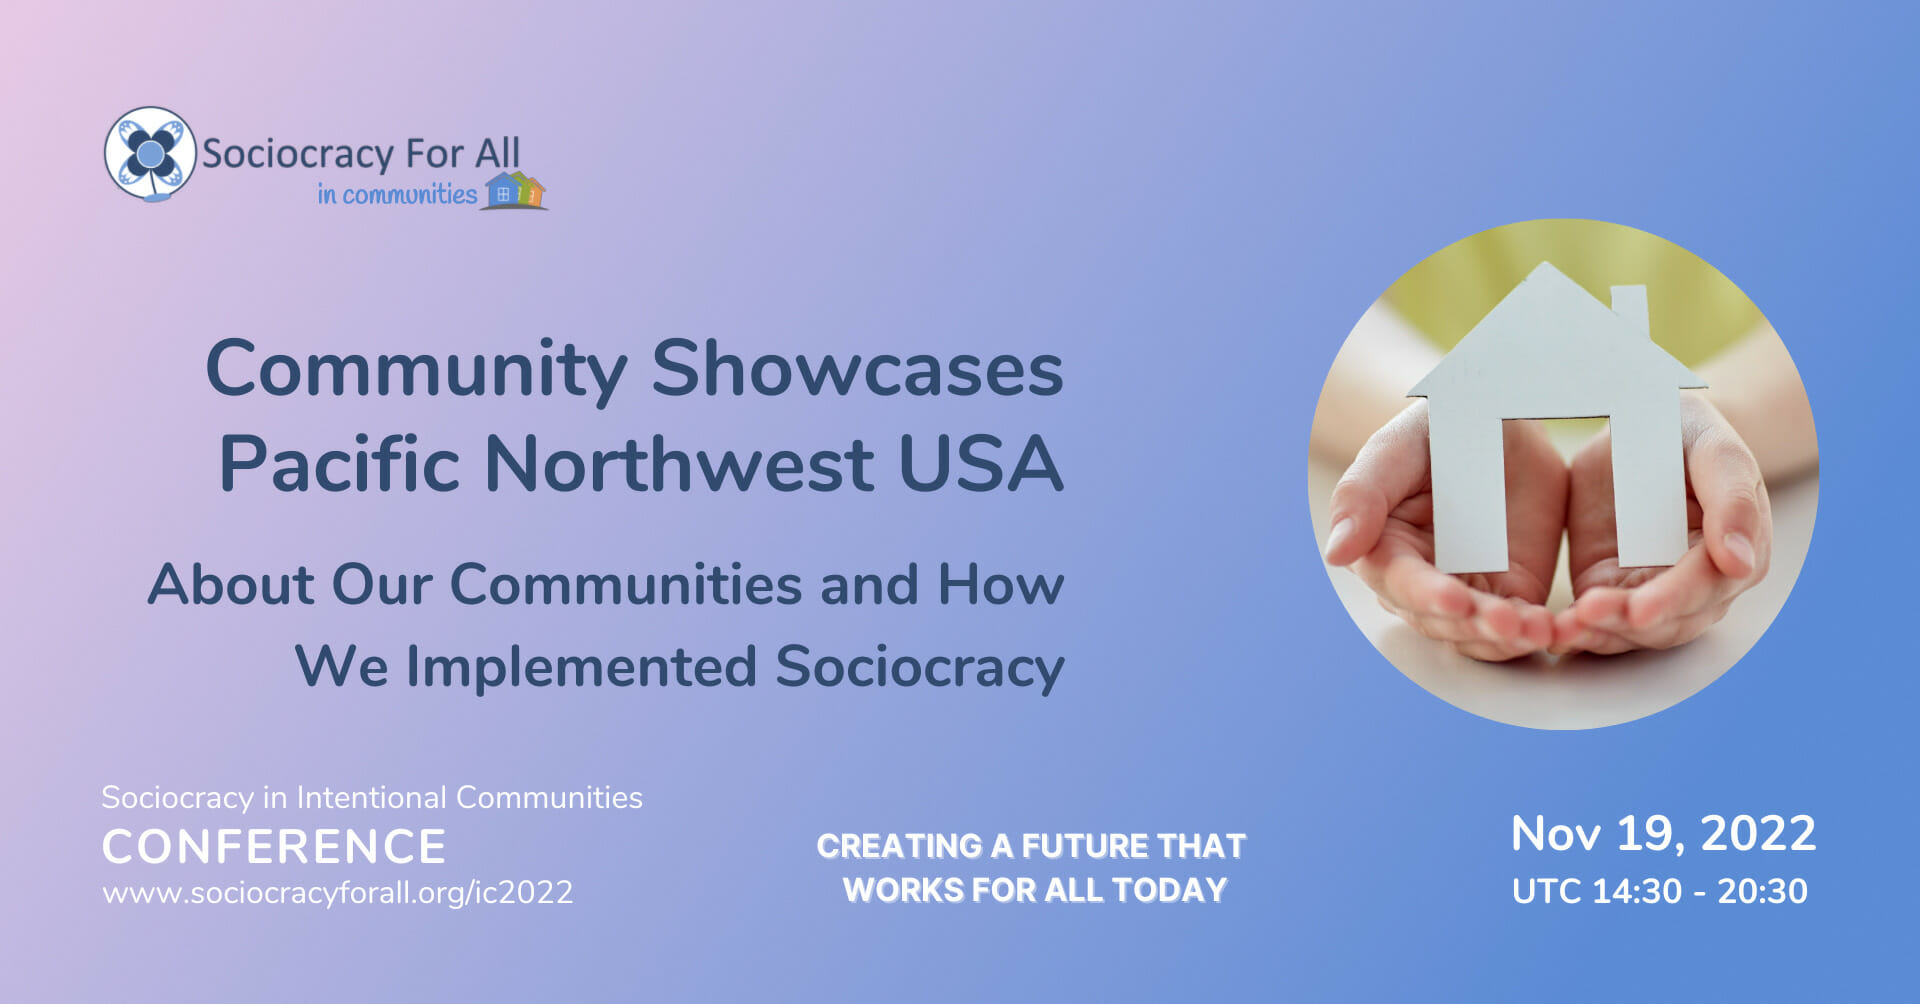 Cohousing showcase: About Our Communities and How We Implemented Sociocracy (Pacific Northwest, USA)